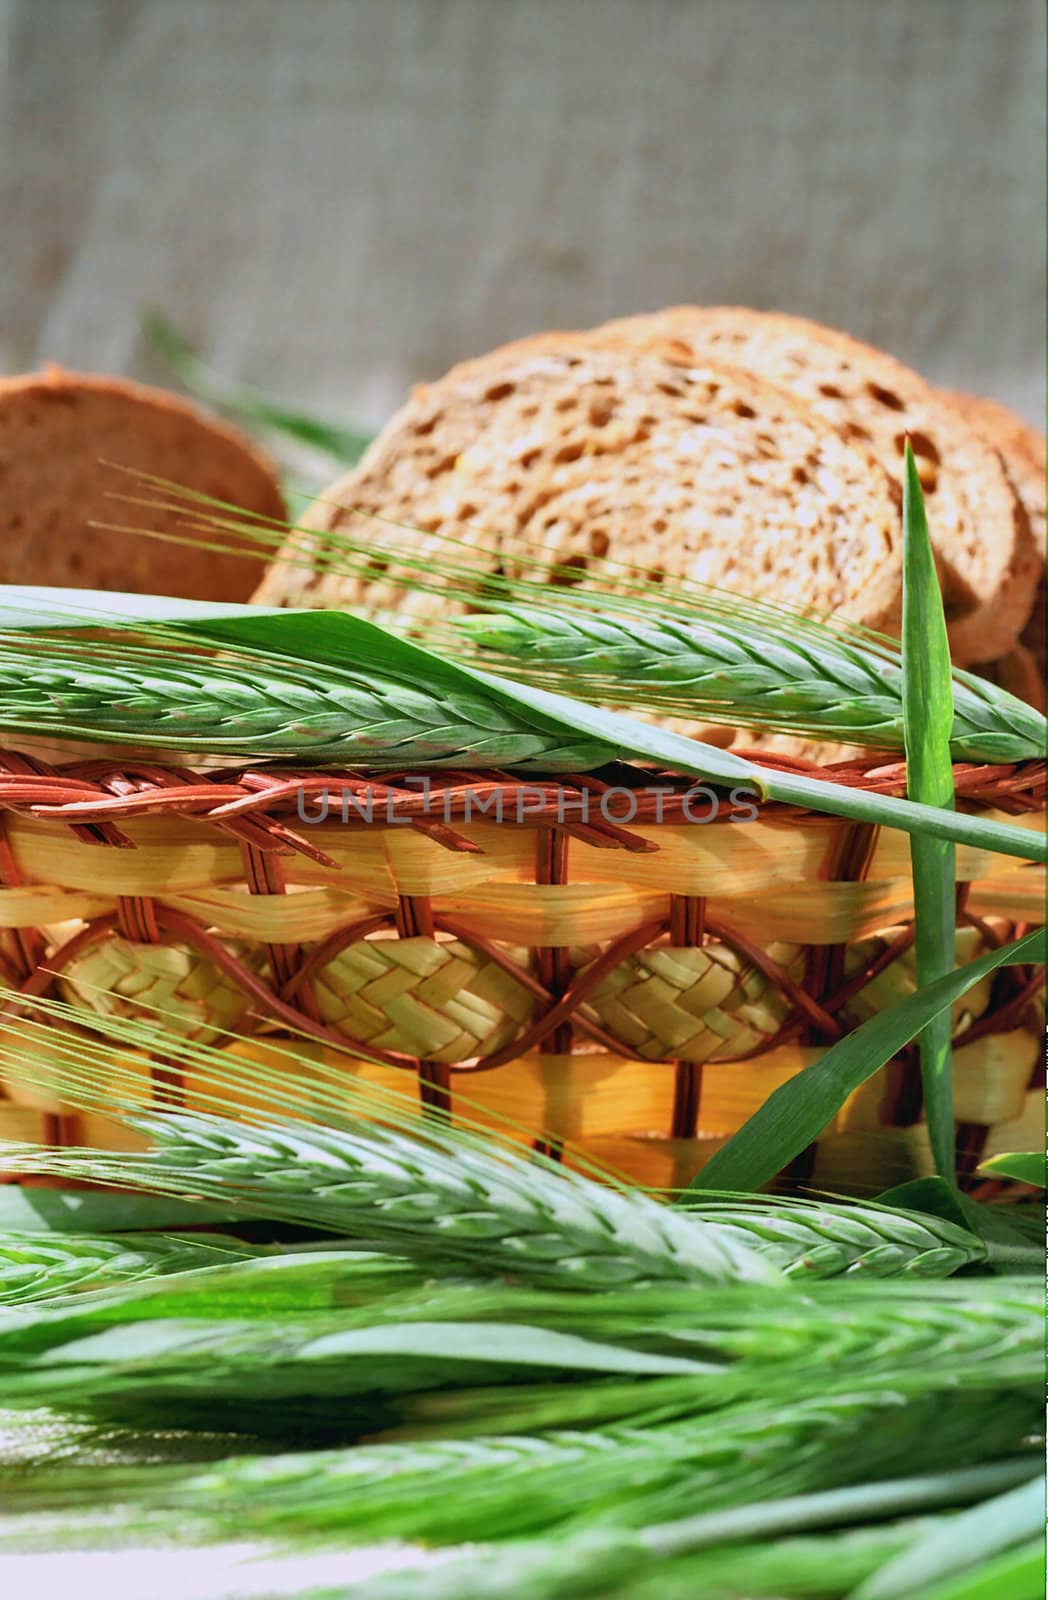 Spicas of rye and bread slices in basket